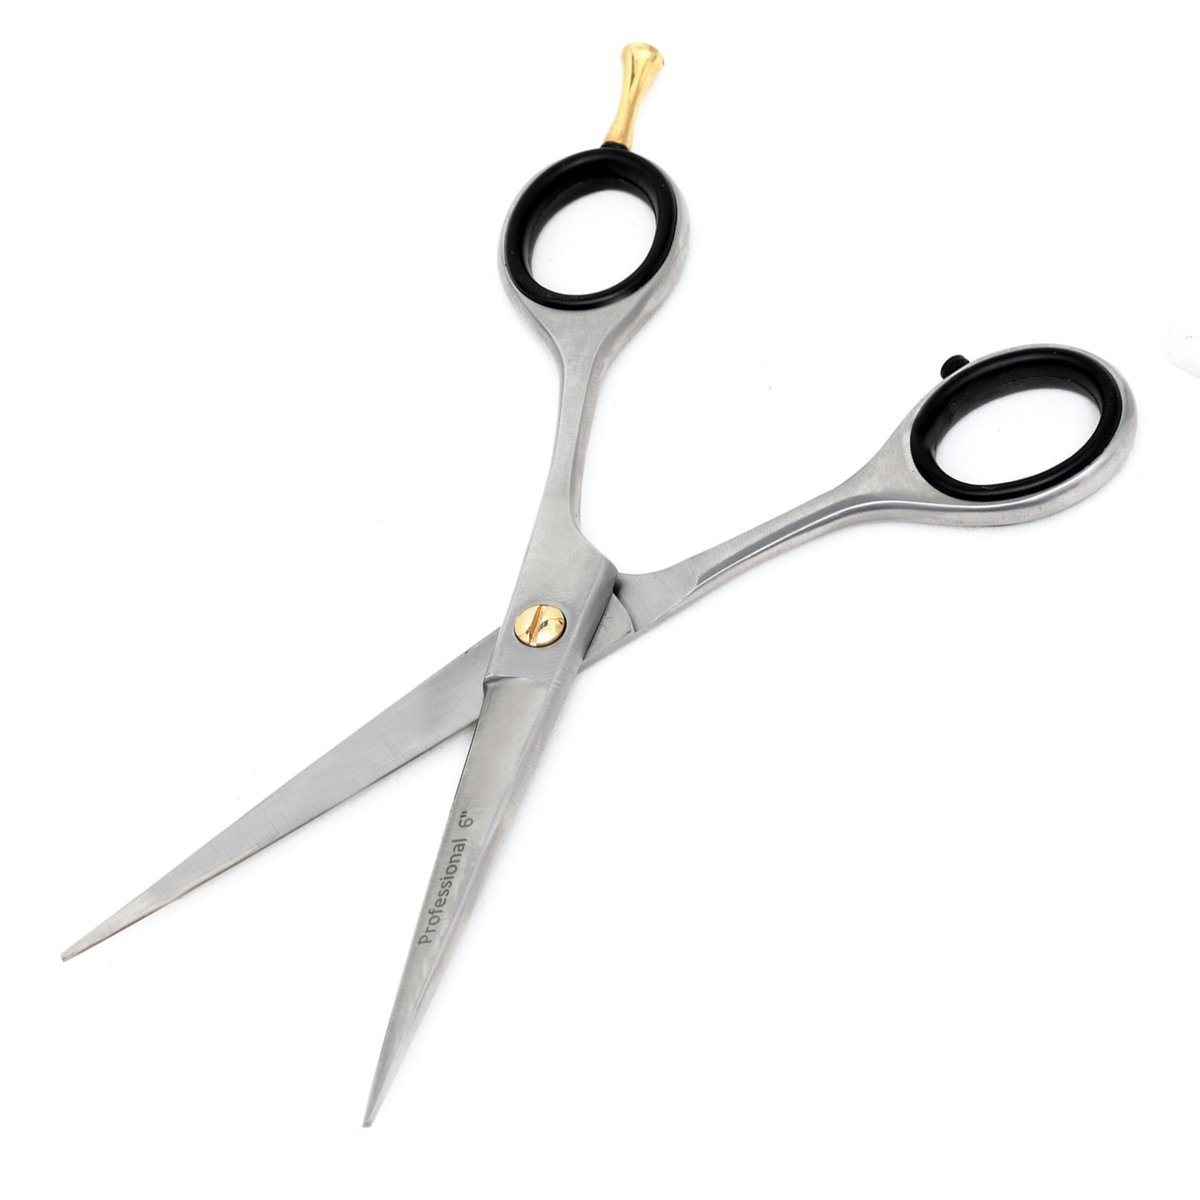 Japanese Stainless Steel Hair Scissors | Right Handed 6" - Beauty Hair Products LtdAccessories